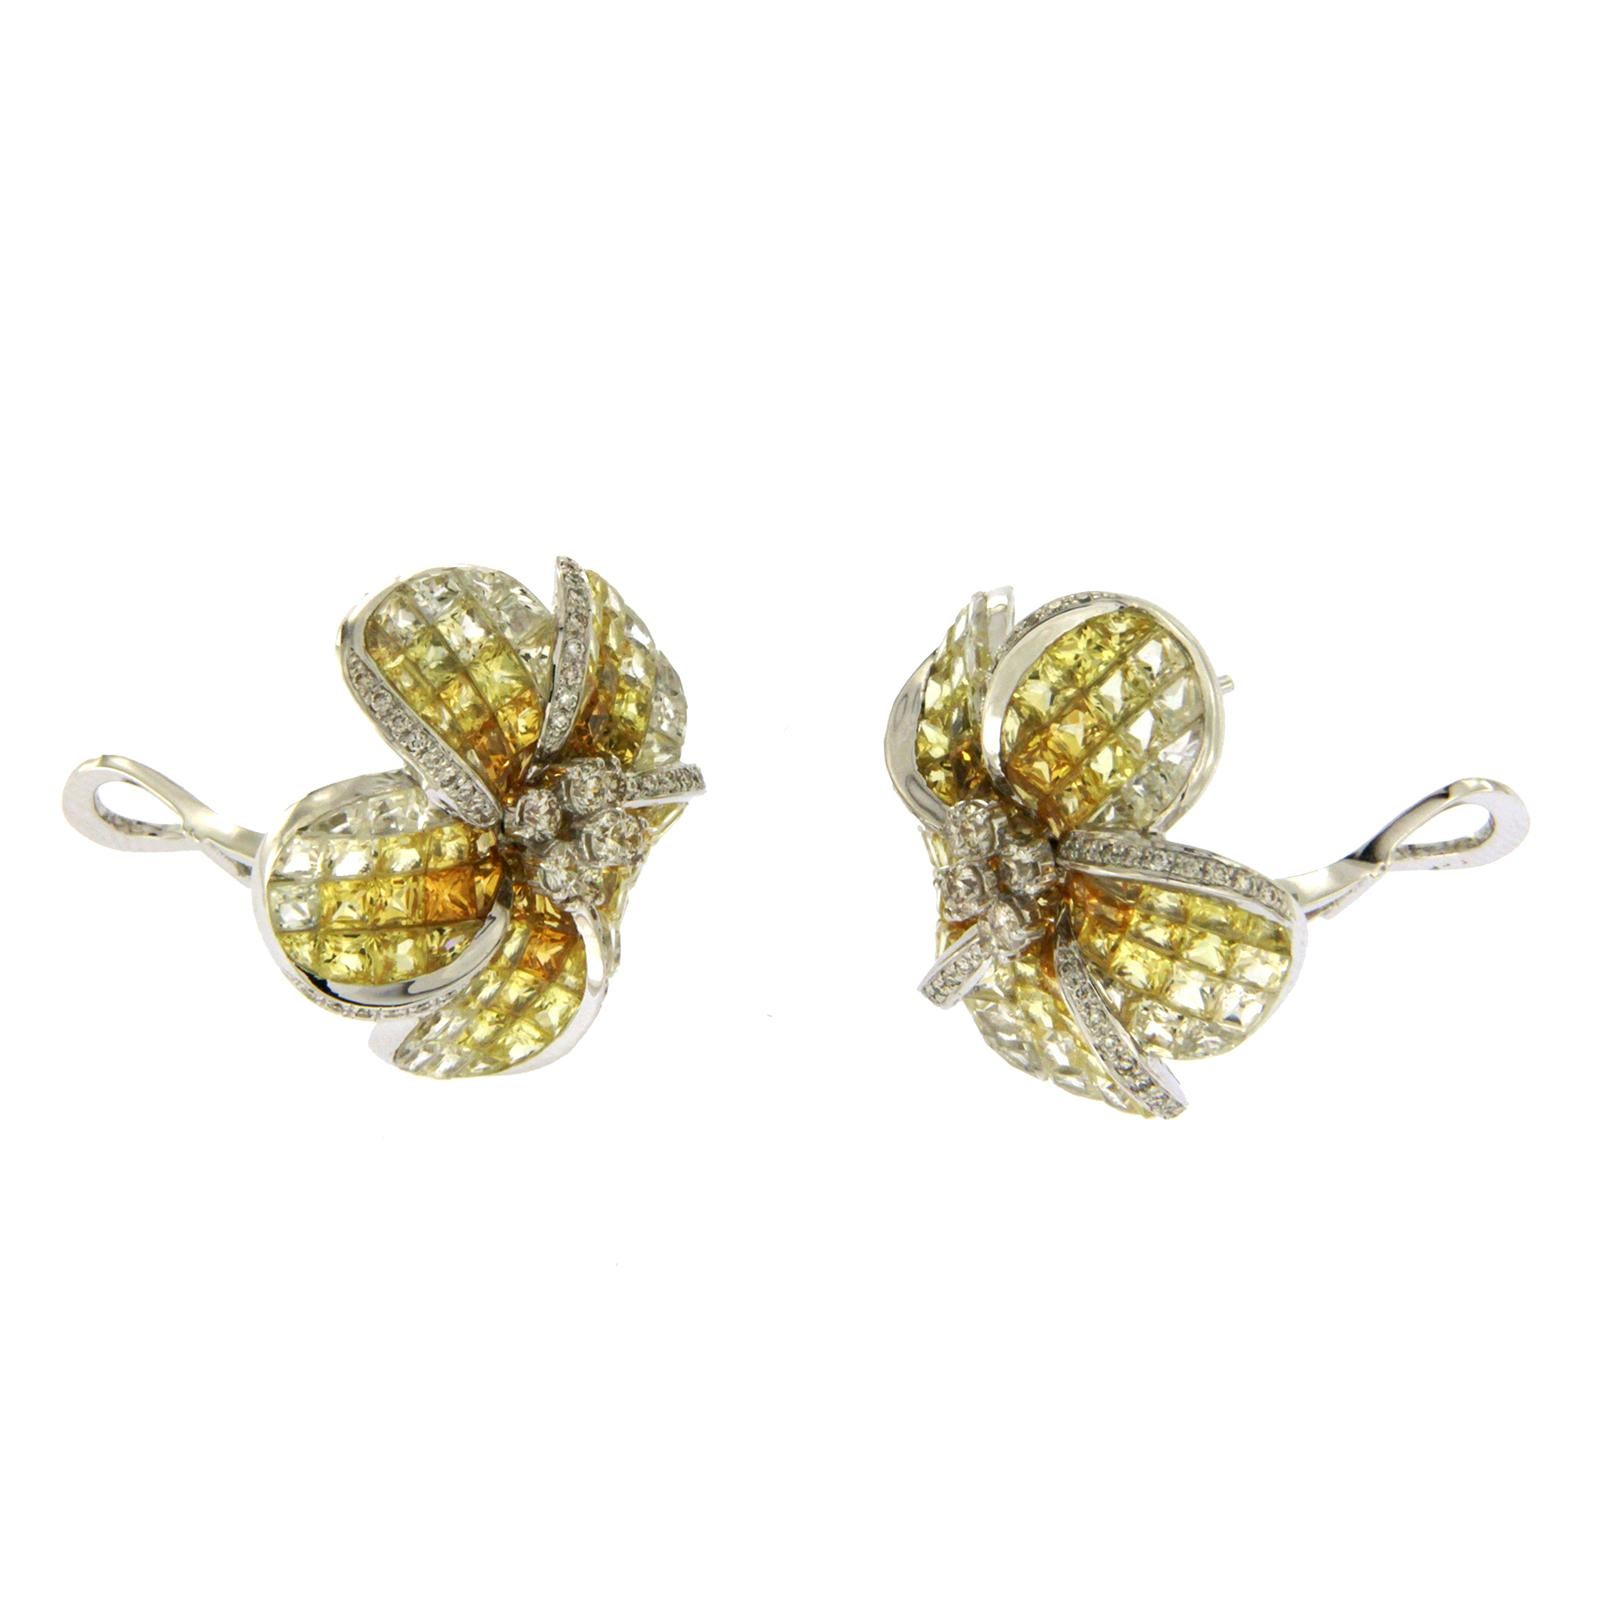 18k White Gold 0.38 Ct Diamonds & 14.13 Ct Yellow Sapphire Flower Earrings In New Condition For Sale In Los Angeles, CA